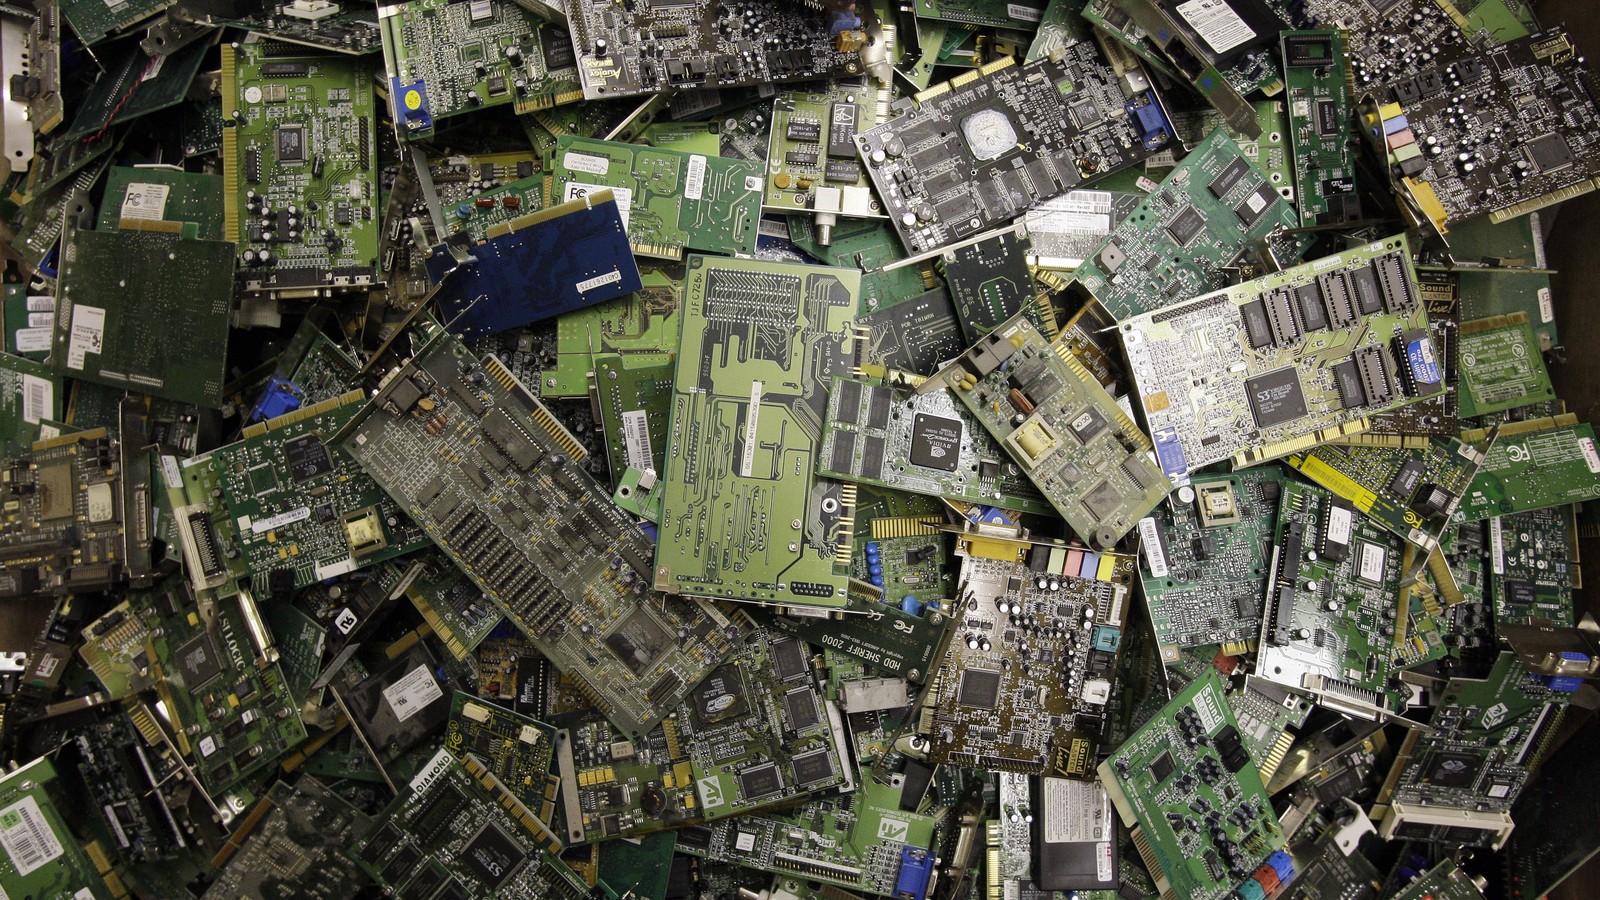 Got new gadgets for Christmas? Recycle old electronics